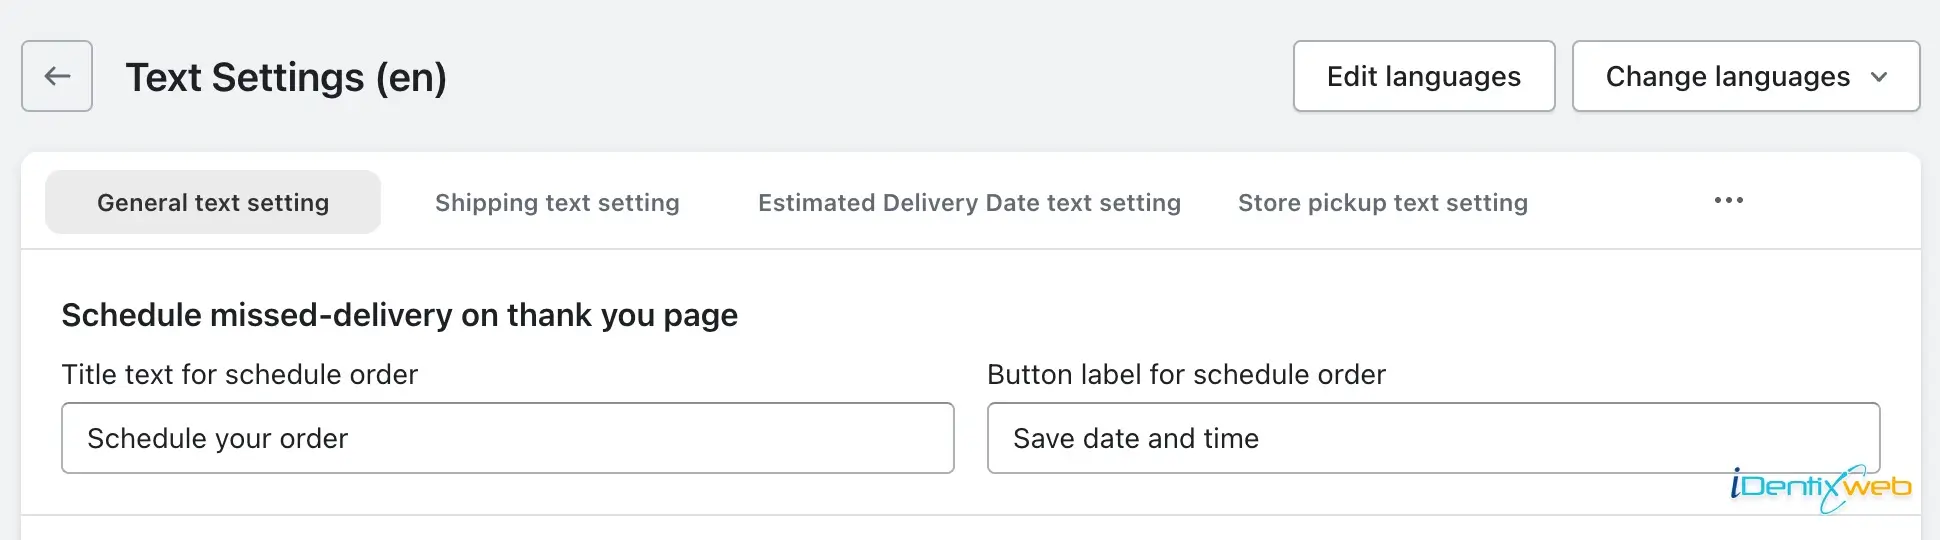 Scheduled Missed Delivery On Thank You Page